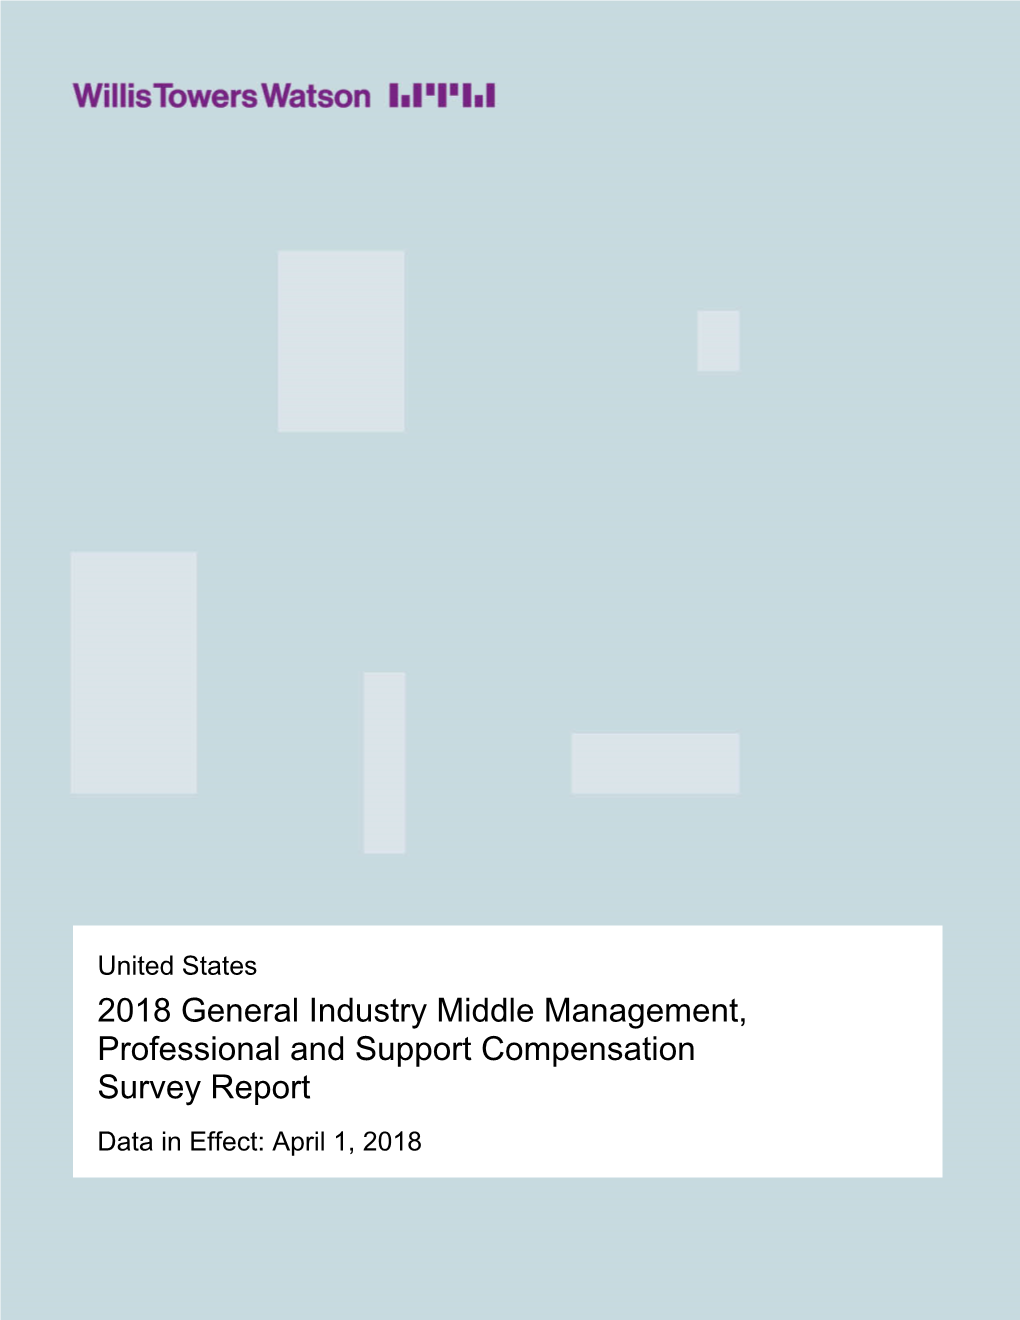 2018 General Industry Middle Management, Professional and Support Compensation Survey Report